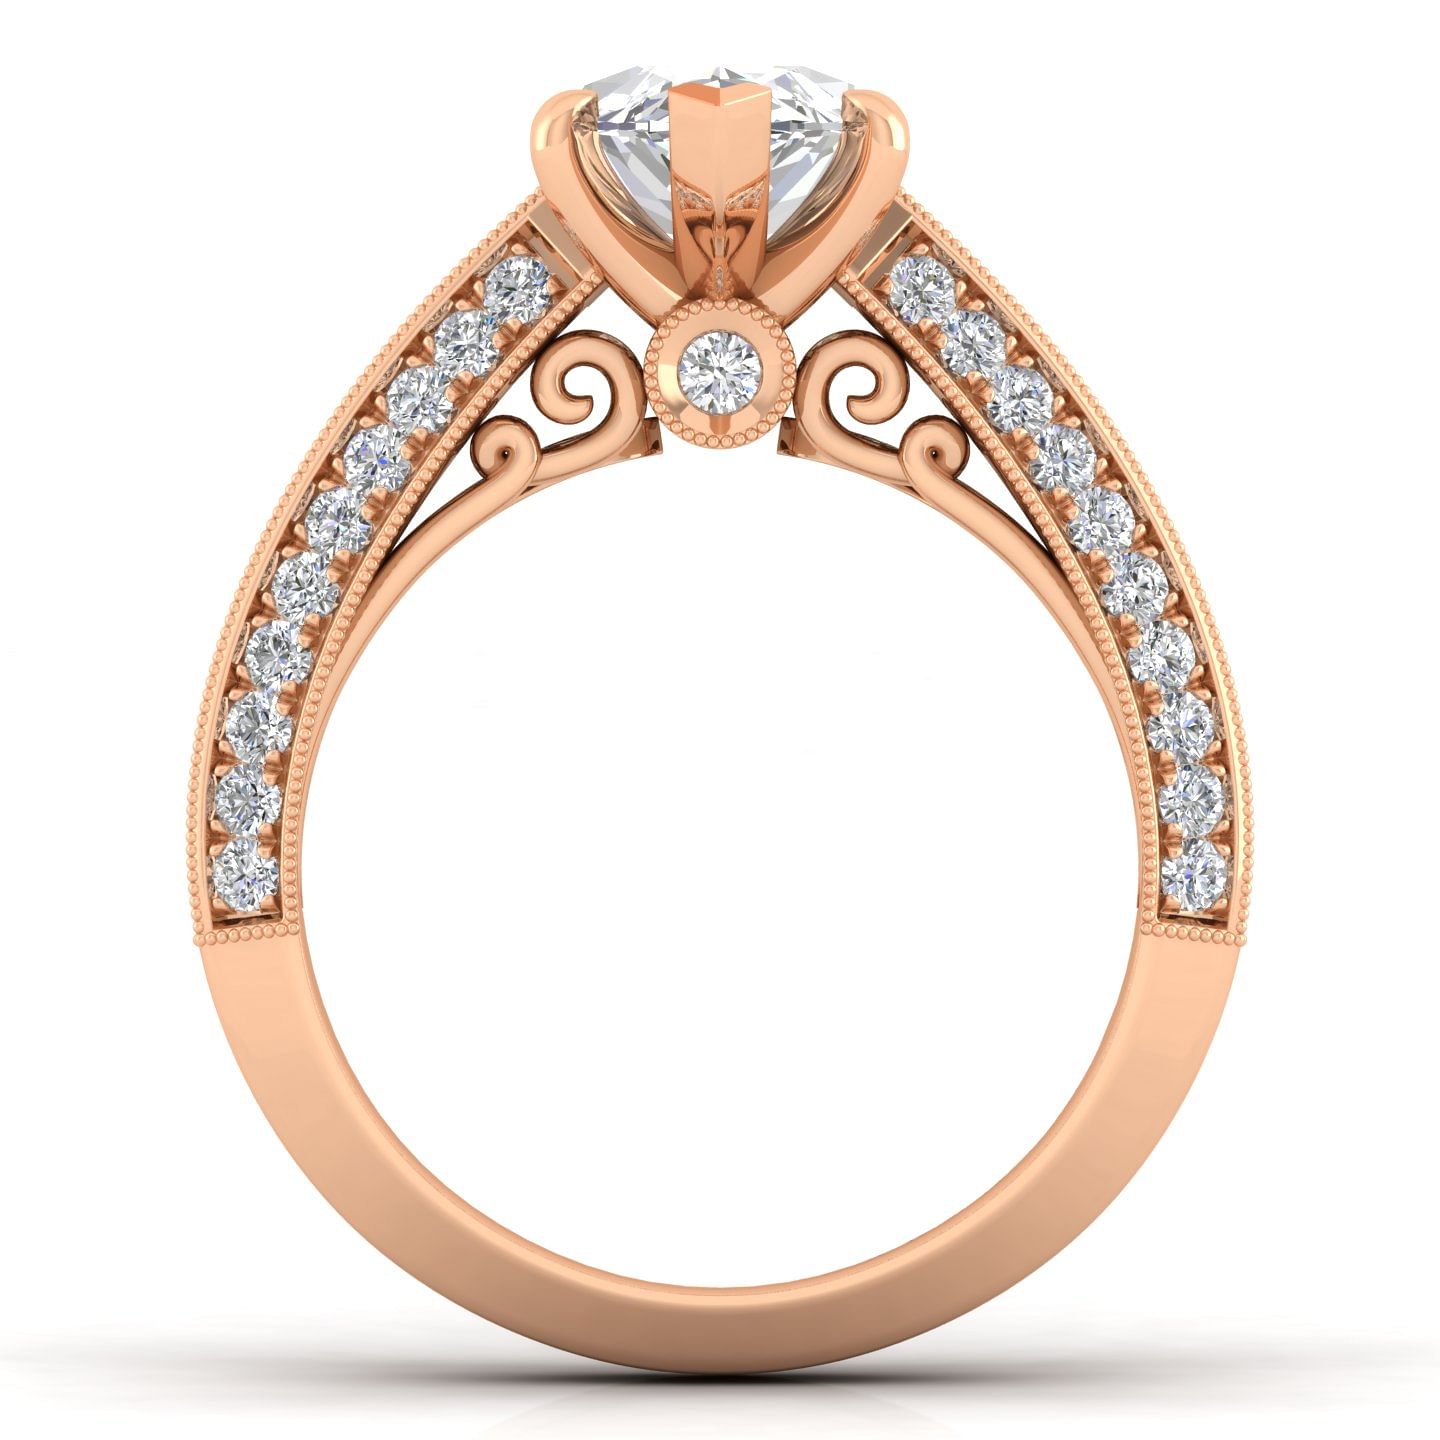 Vintage Inspired 14K Rose Gold Wide Band Marquise Shape Diamond Engagement Ring